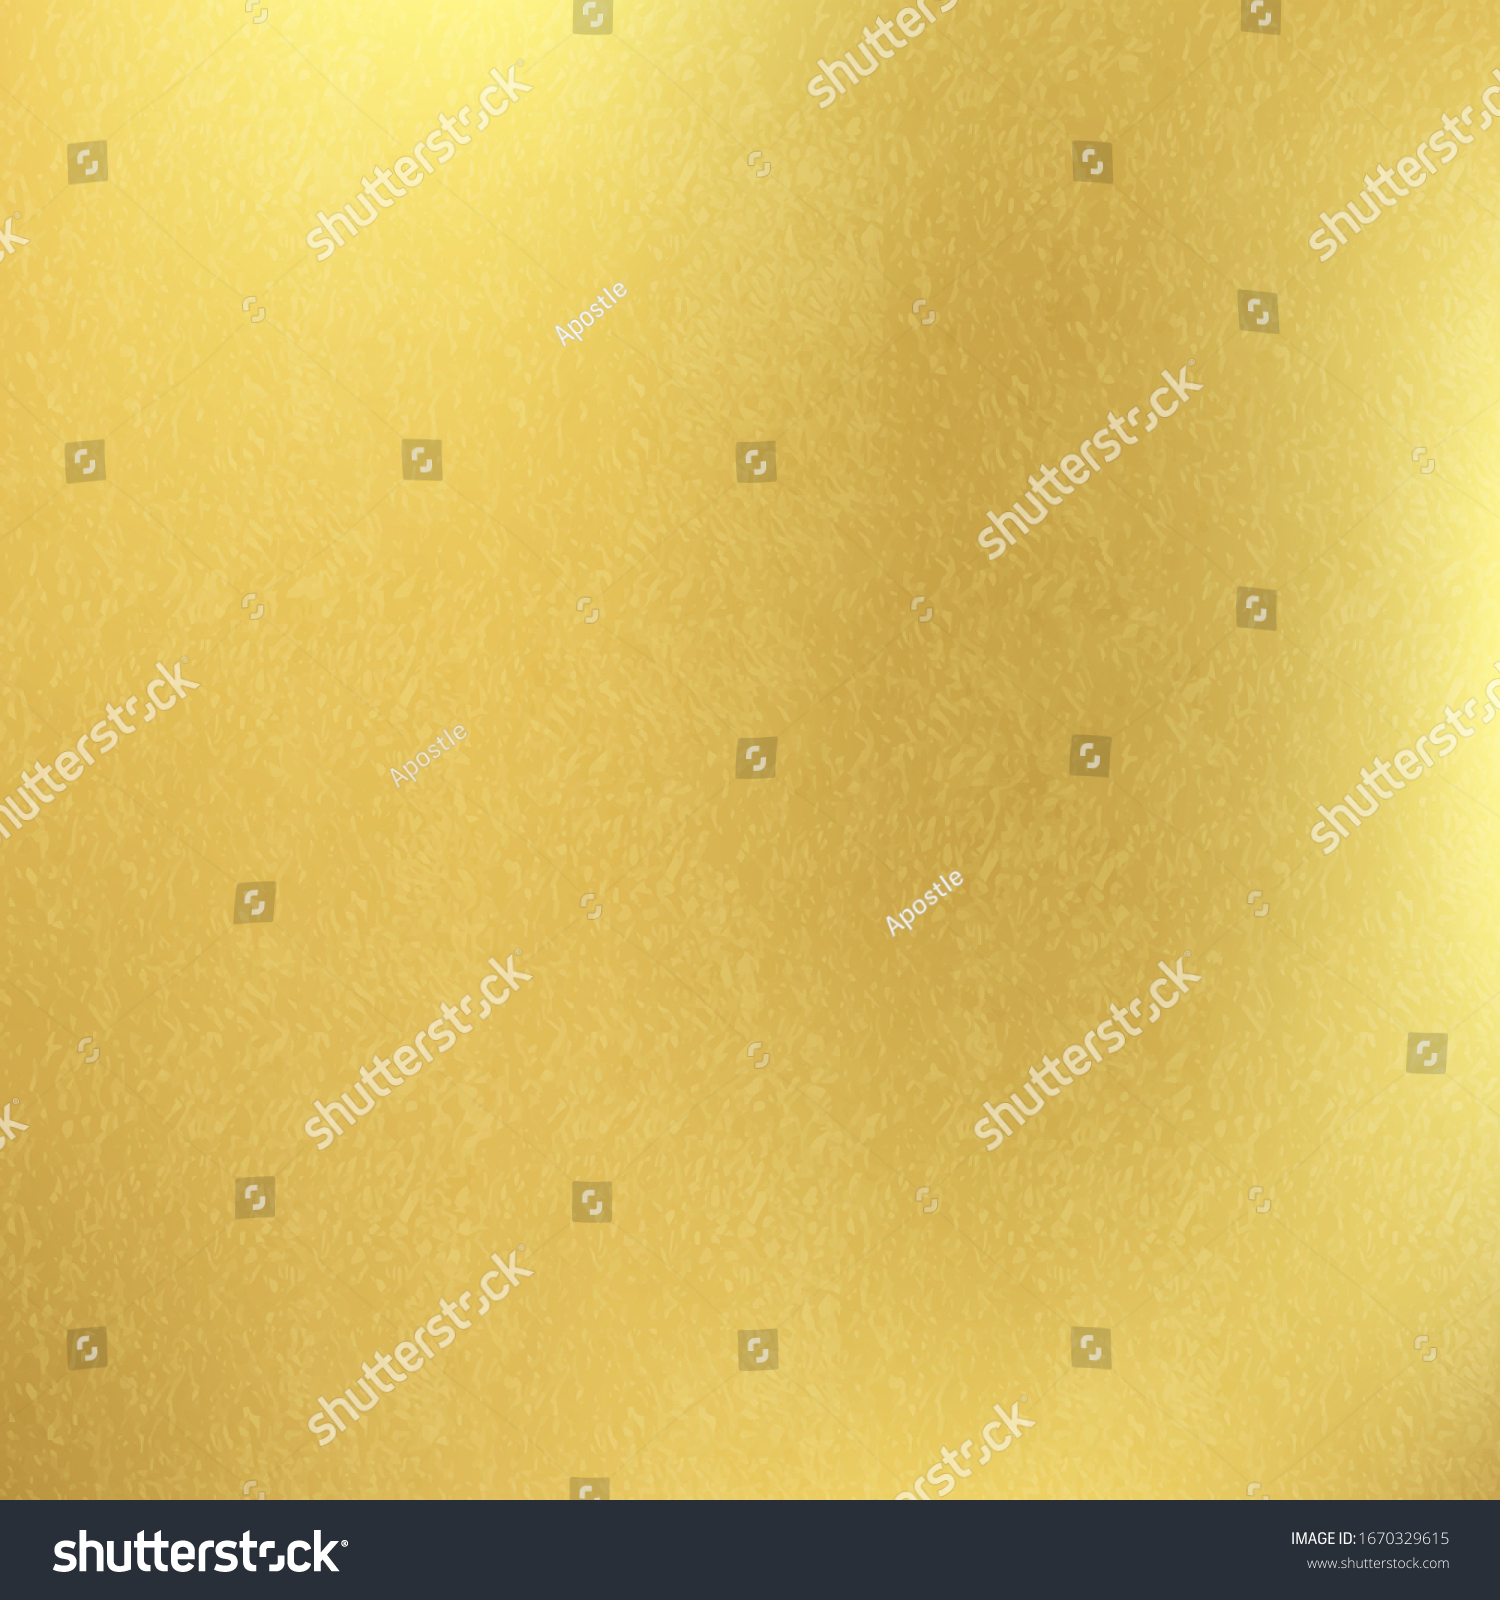 Shiny gold texture paper or metal. Golden vector background. #1670329615